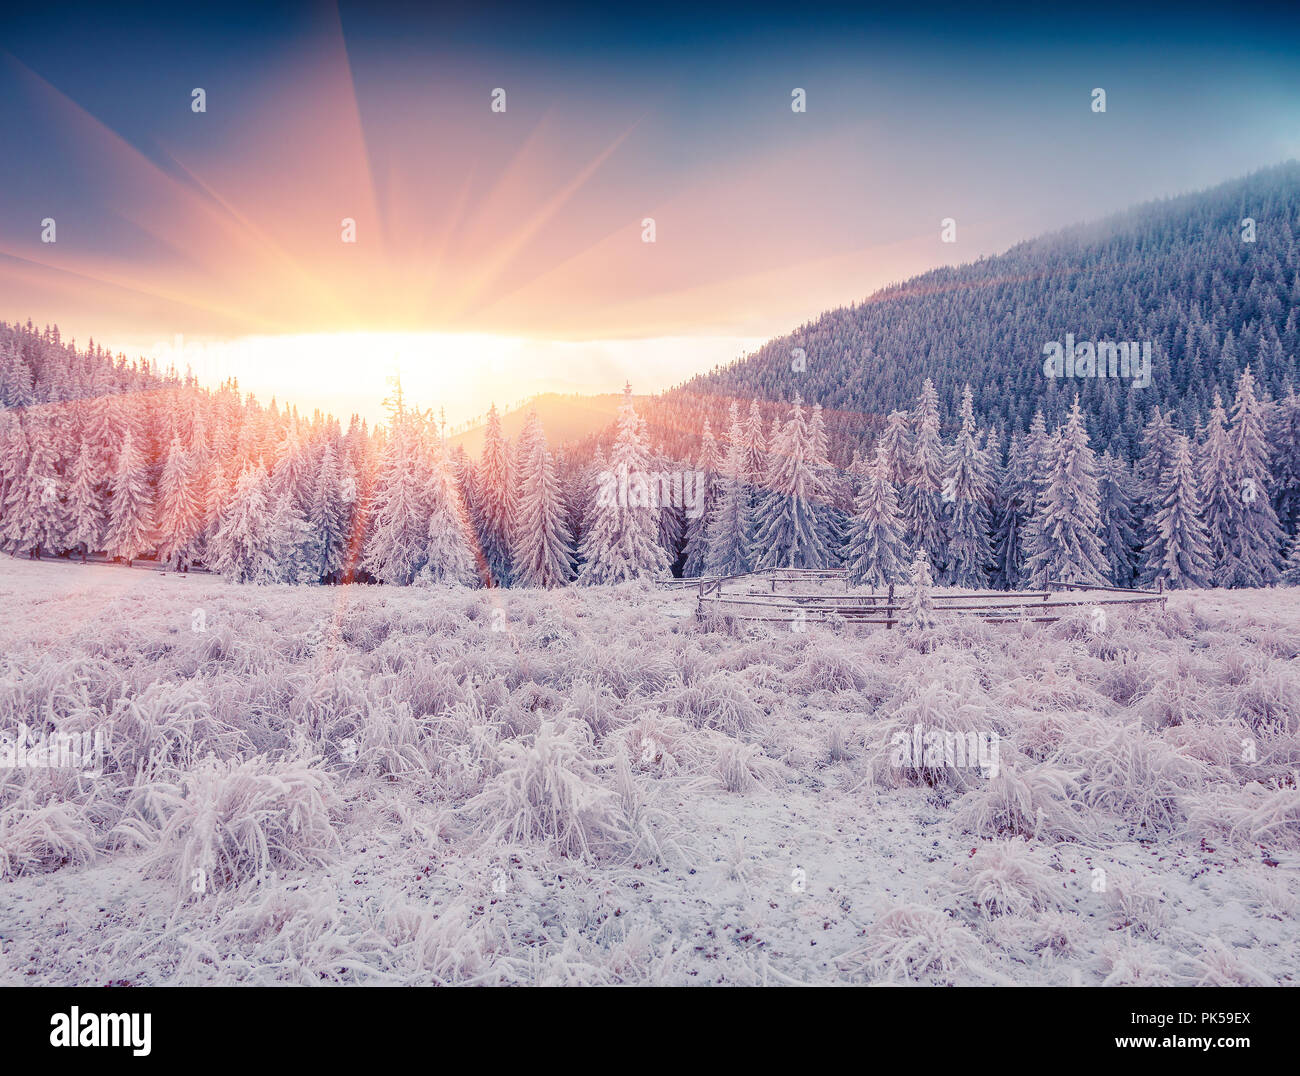 Colorful winter sunrise in the mountain forest. First frost in December. Happy New Year! Stock Photo